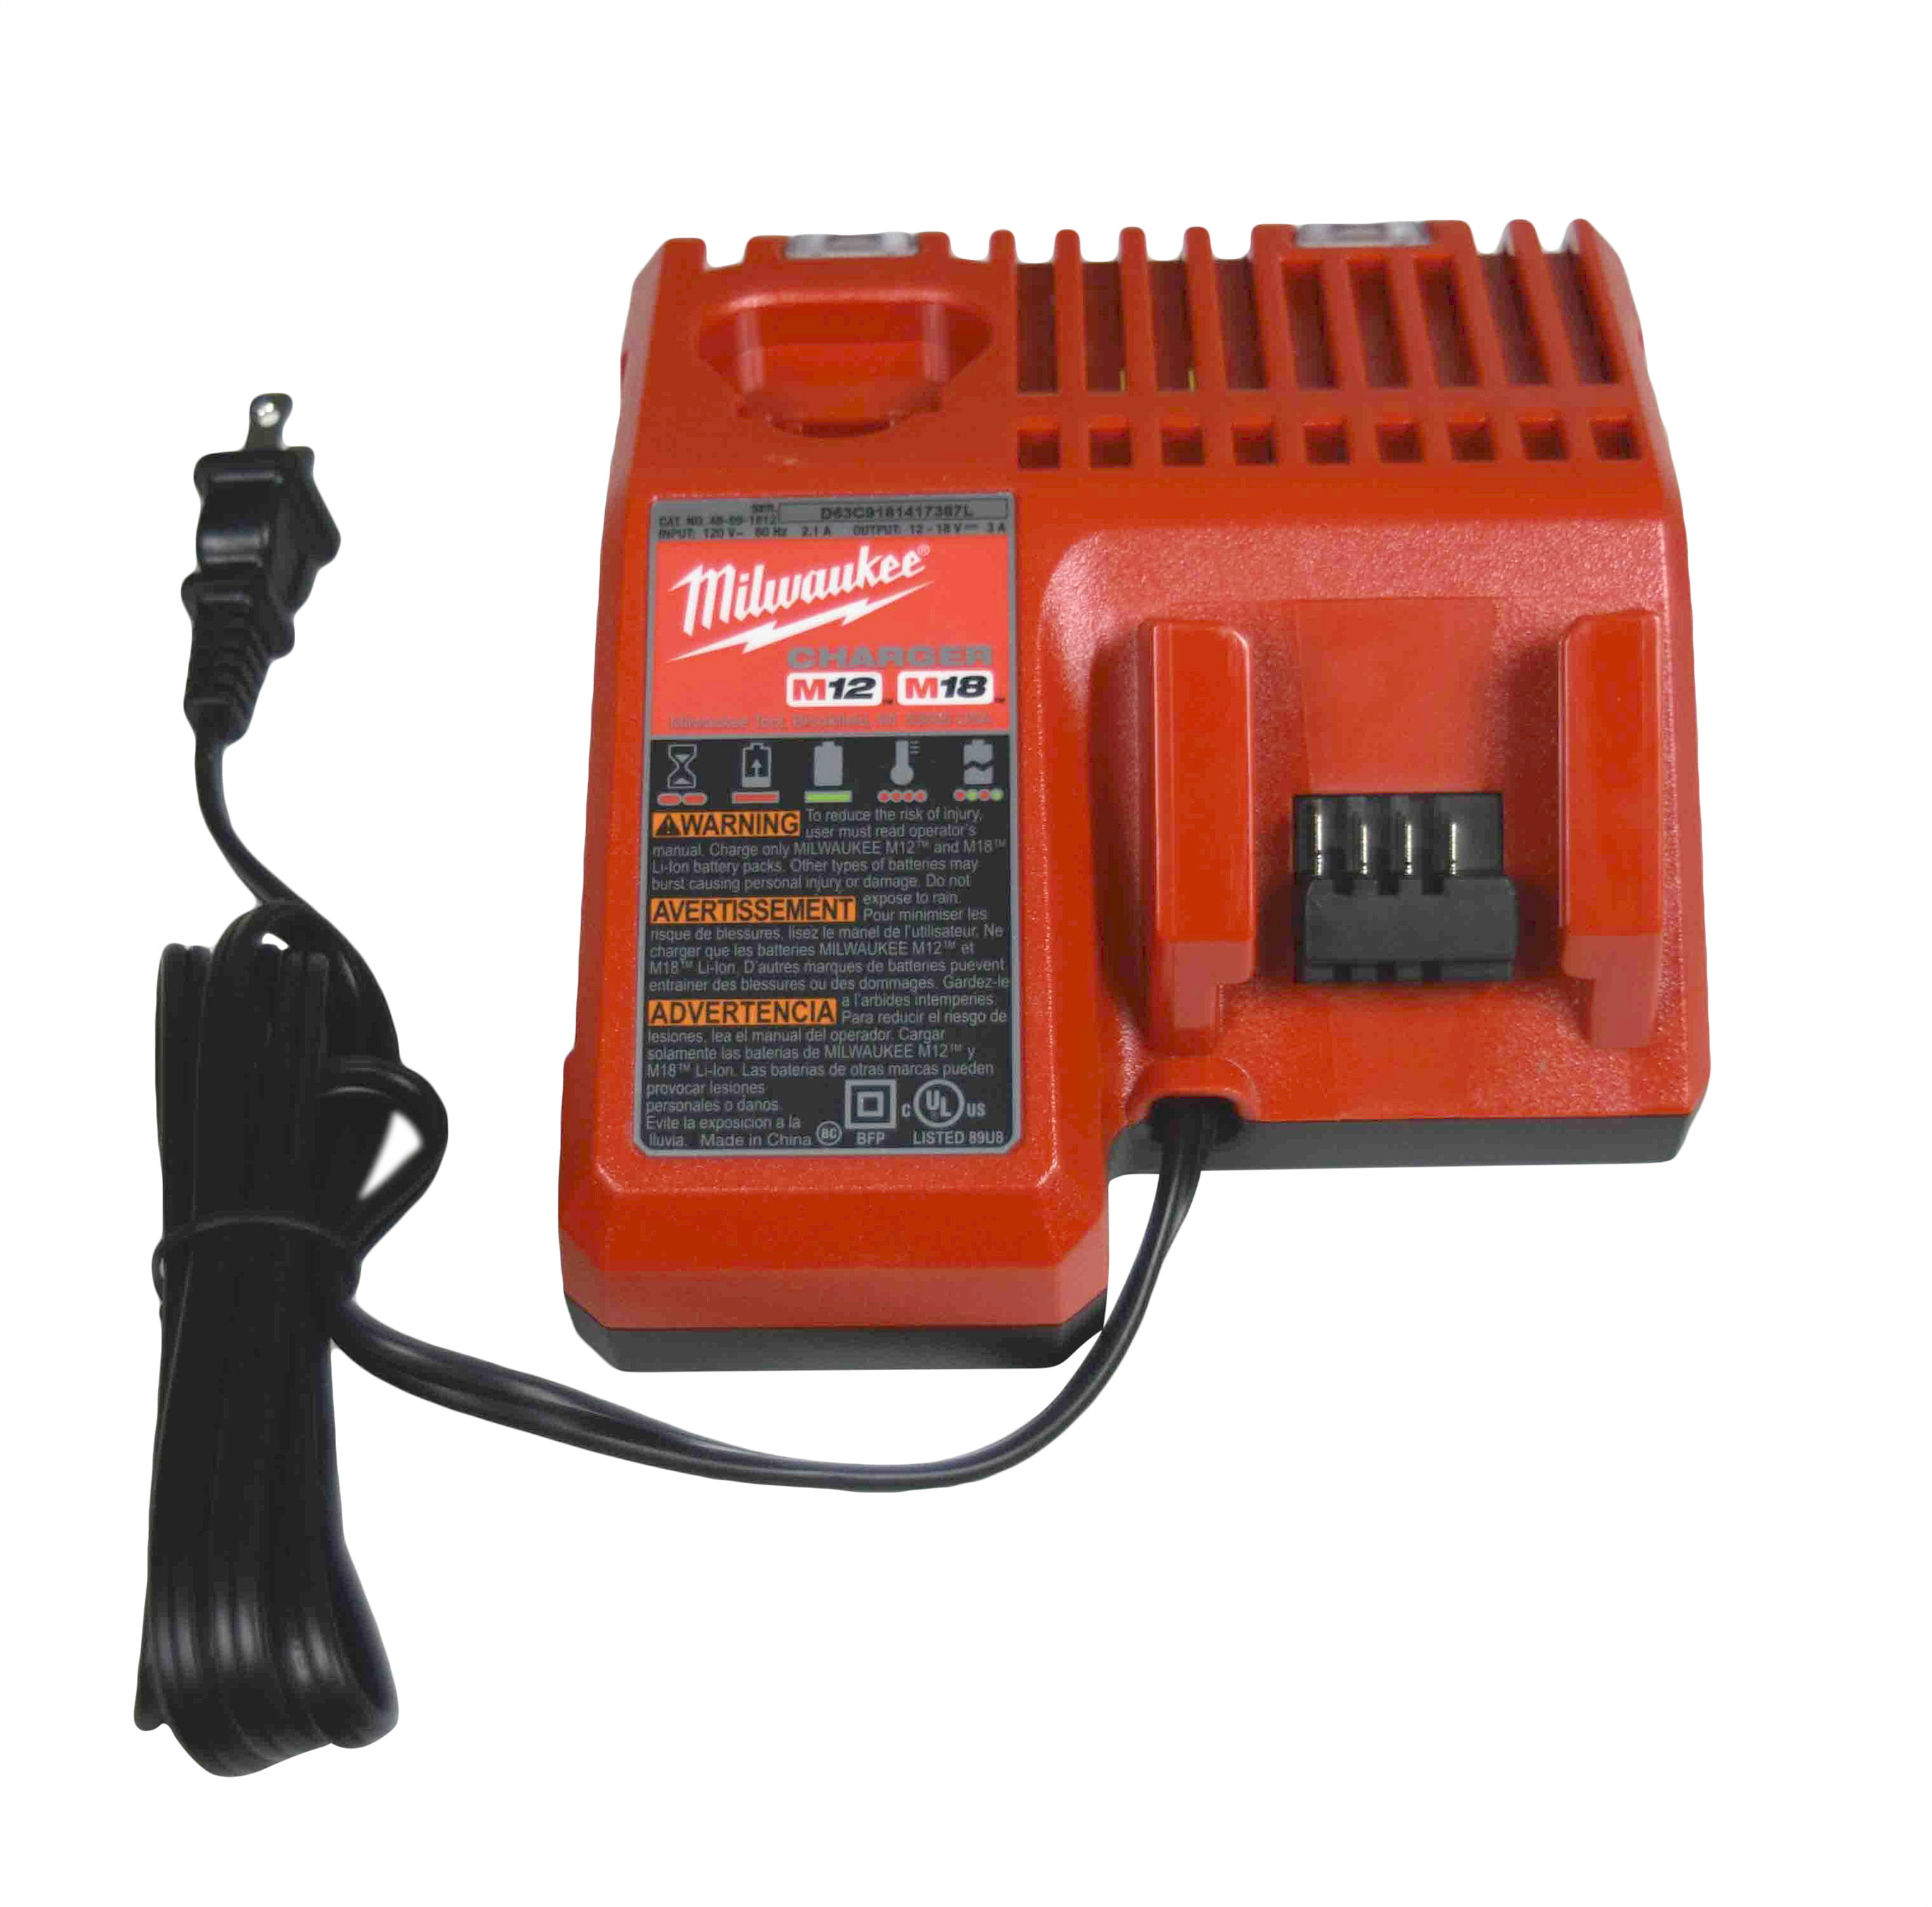 18V Lithium-Ion 2 Gear Hammer Drill + 400mA Charger + 1 Battery +